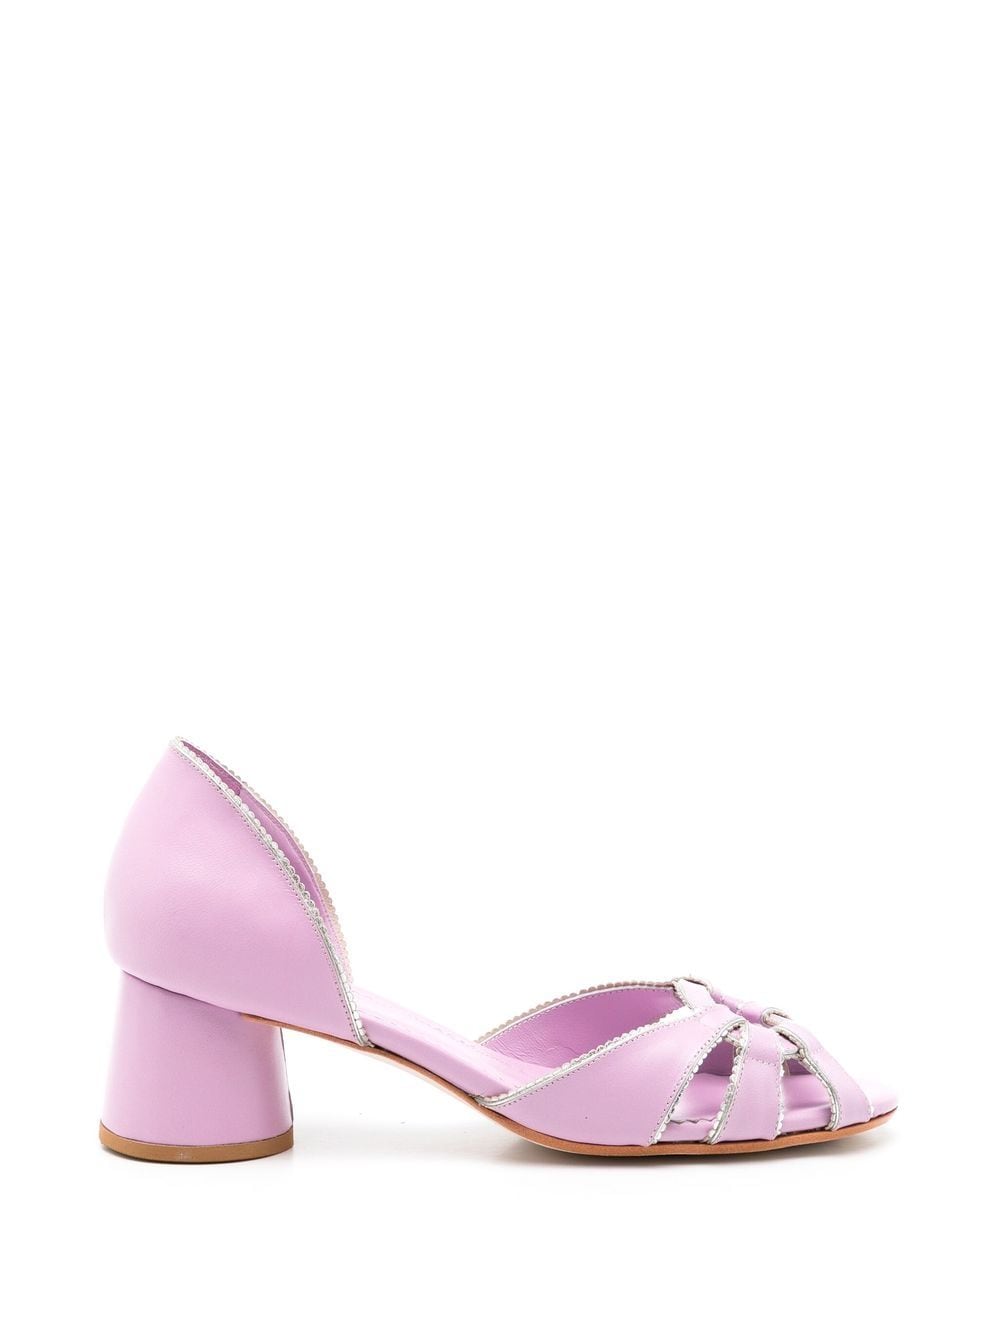 Sarah Chofakian Carrie 55mm Leather Sandals In Purple